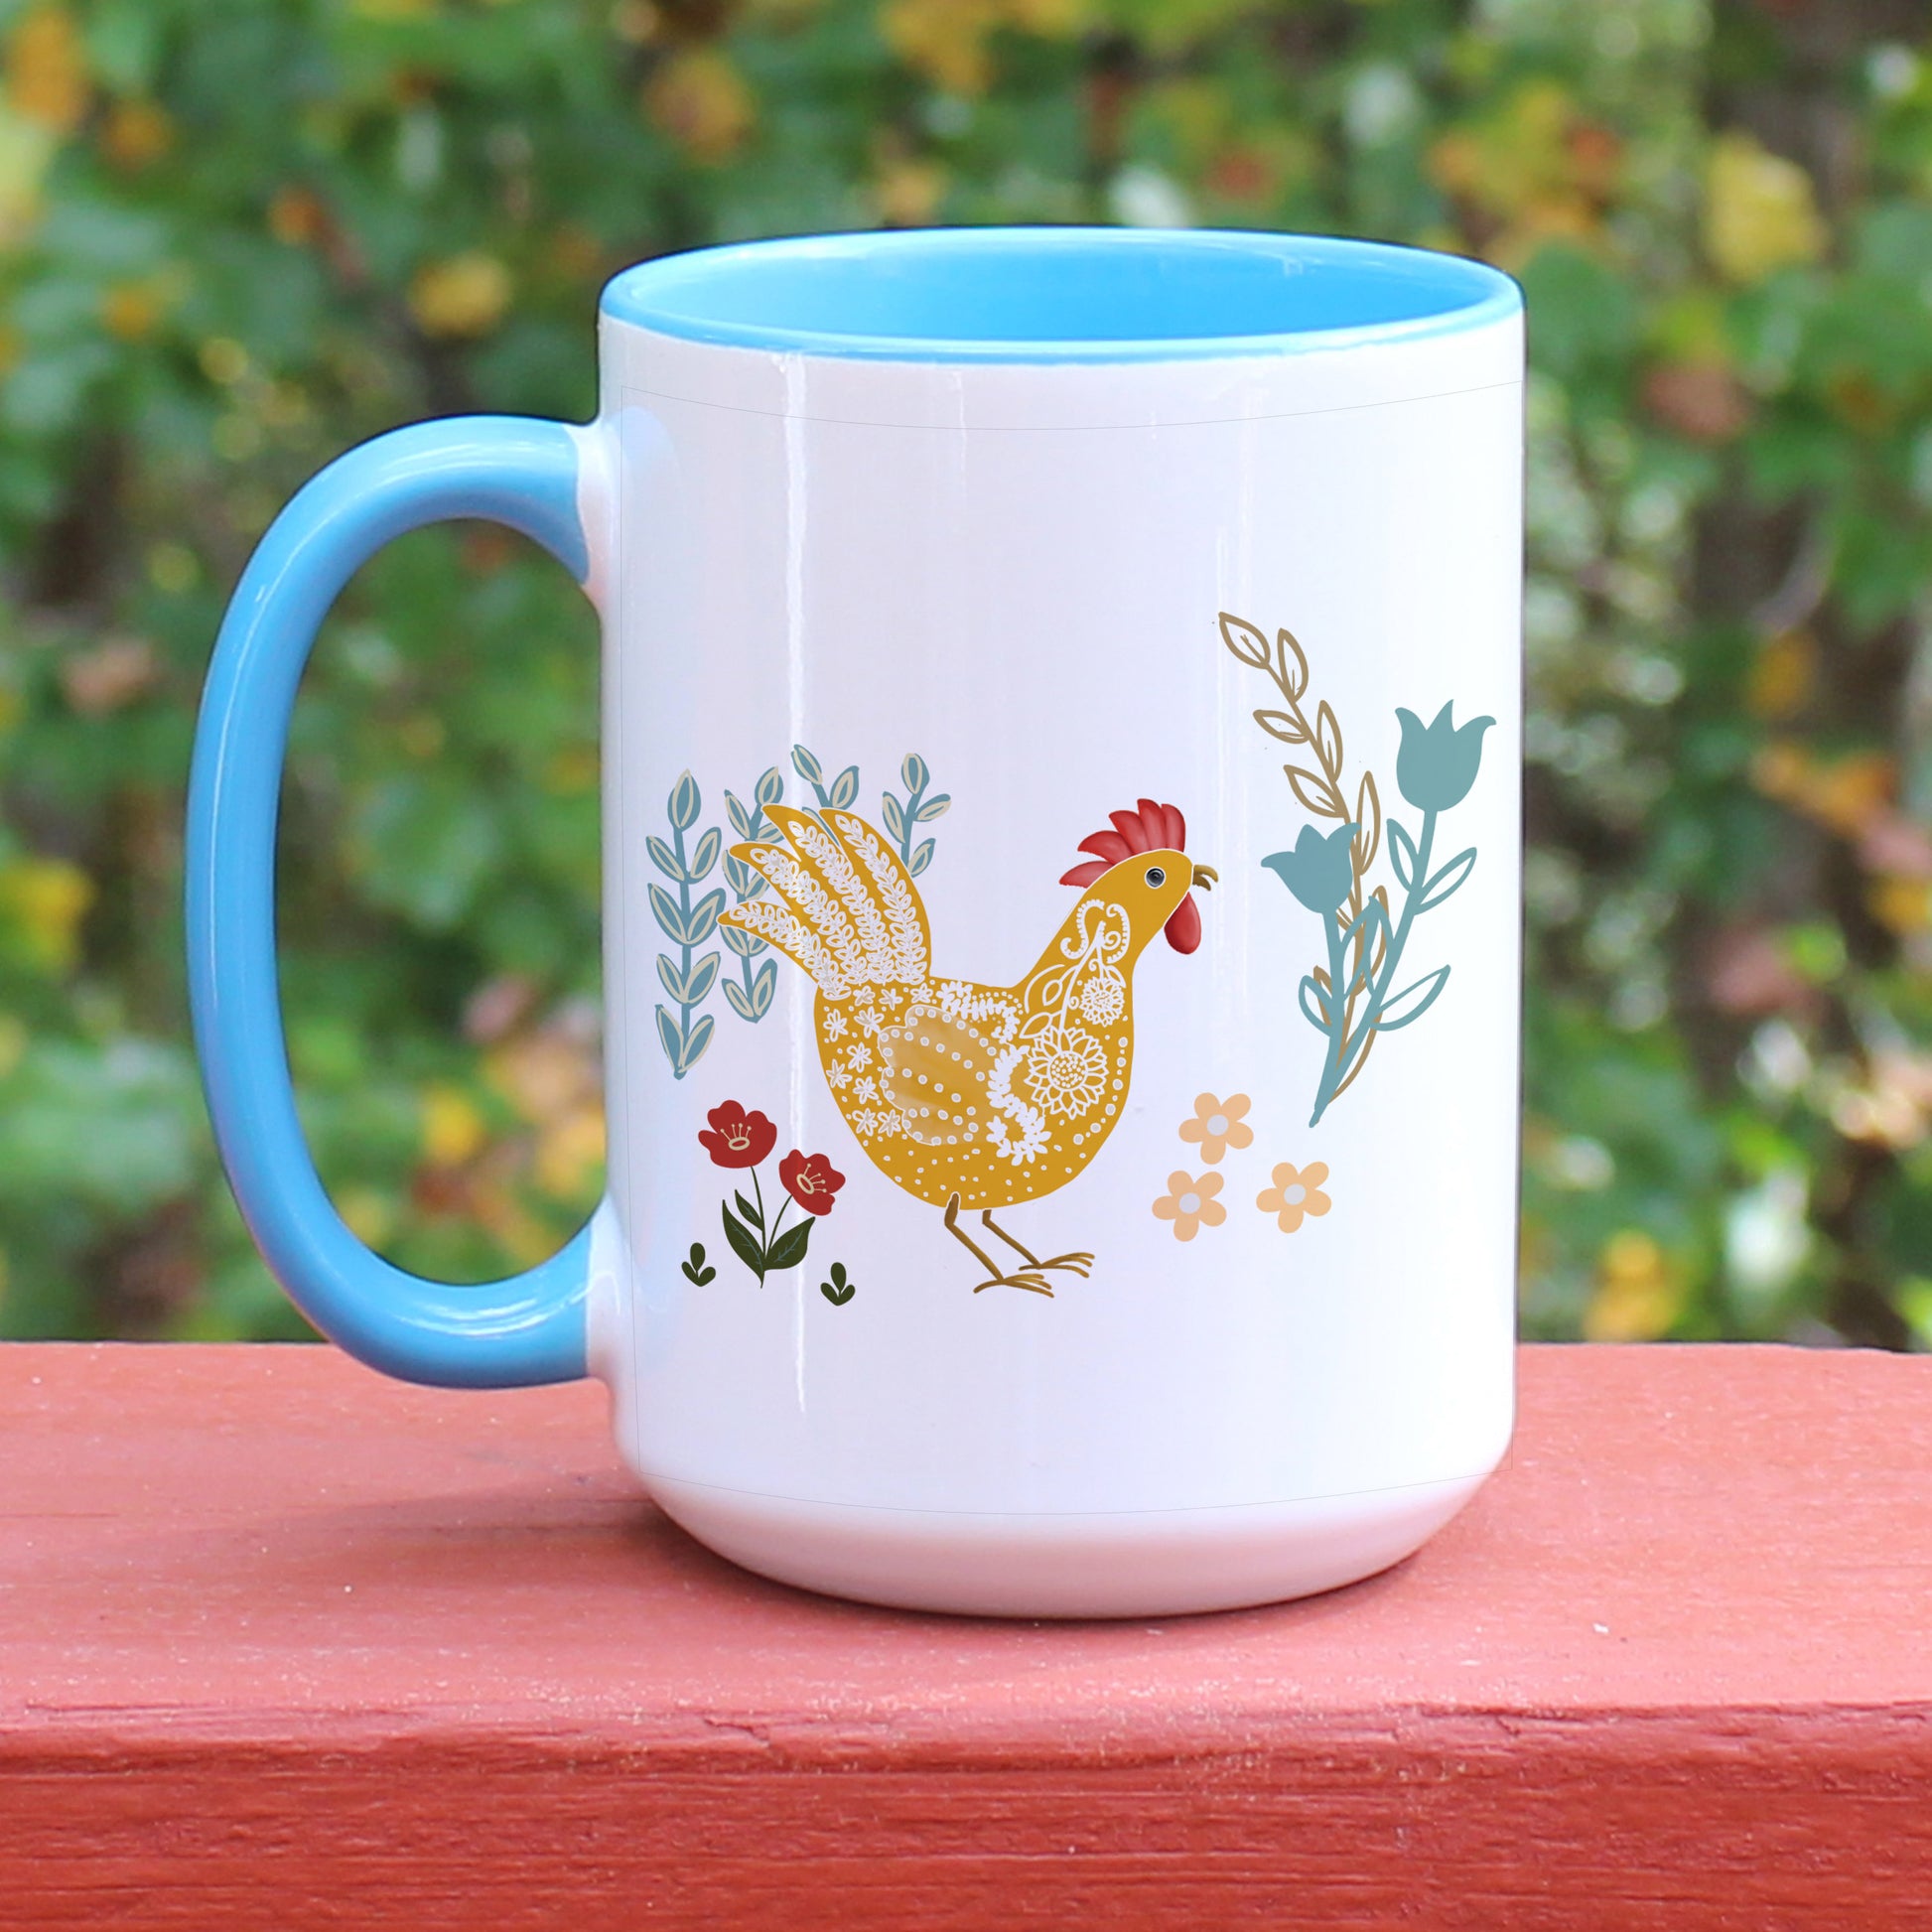 Chicken and rooster themed blue handle ceramic mug with floral designs in blue, yellow, and red.